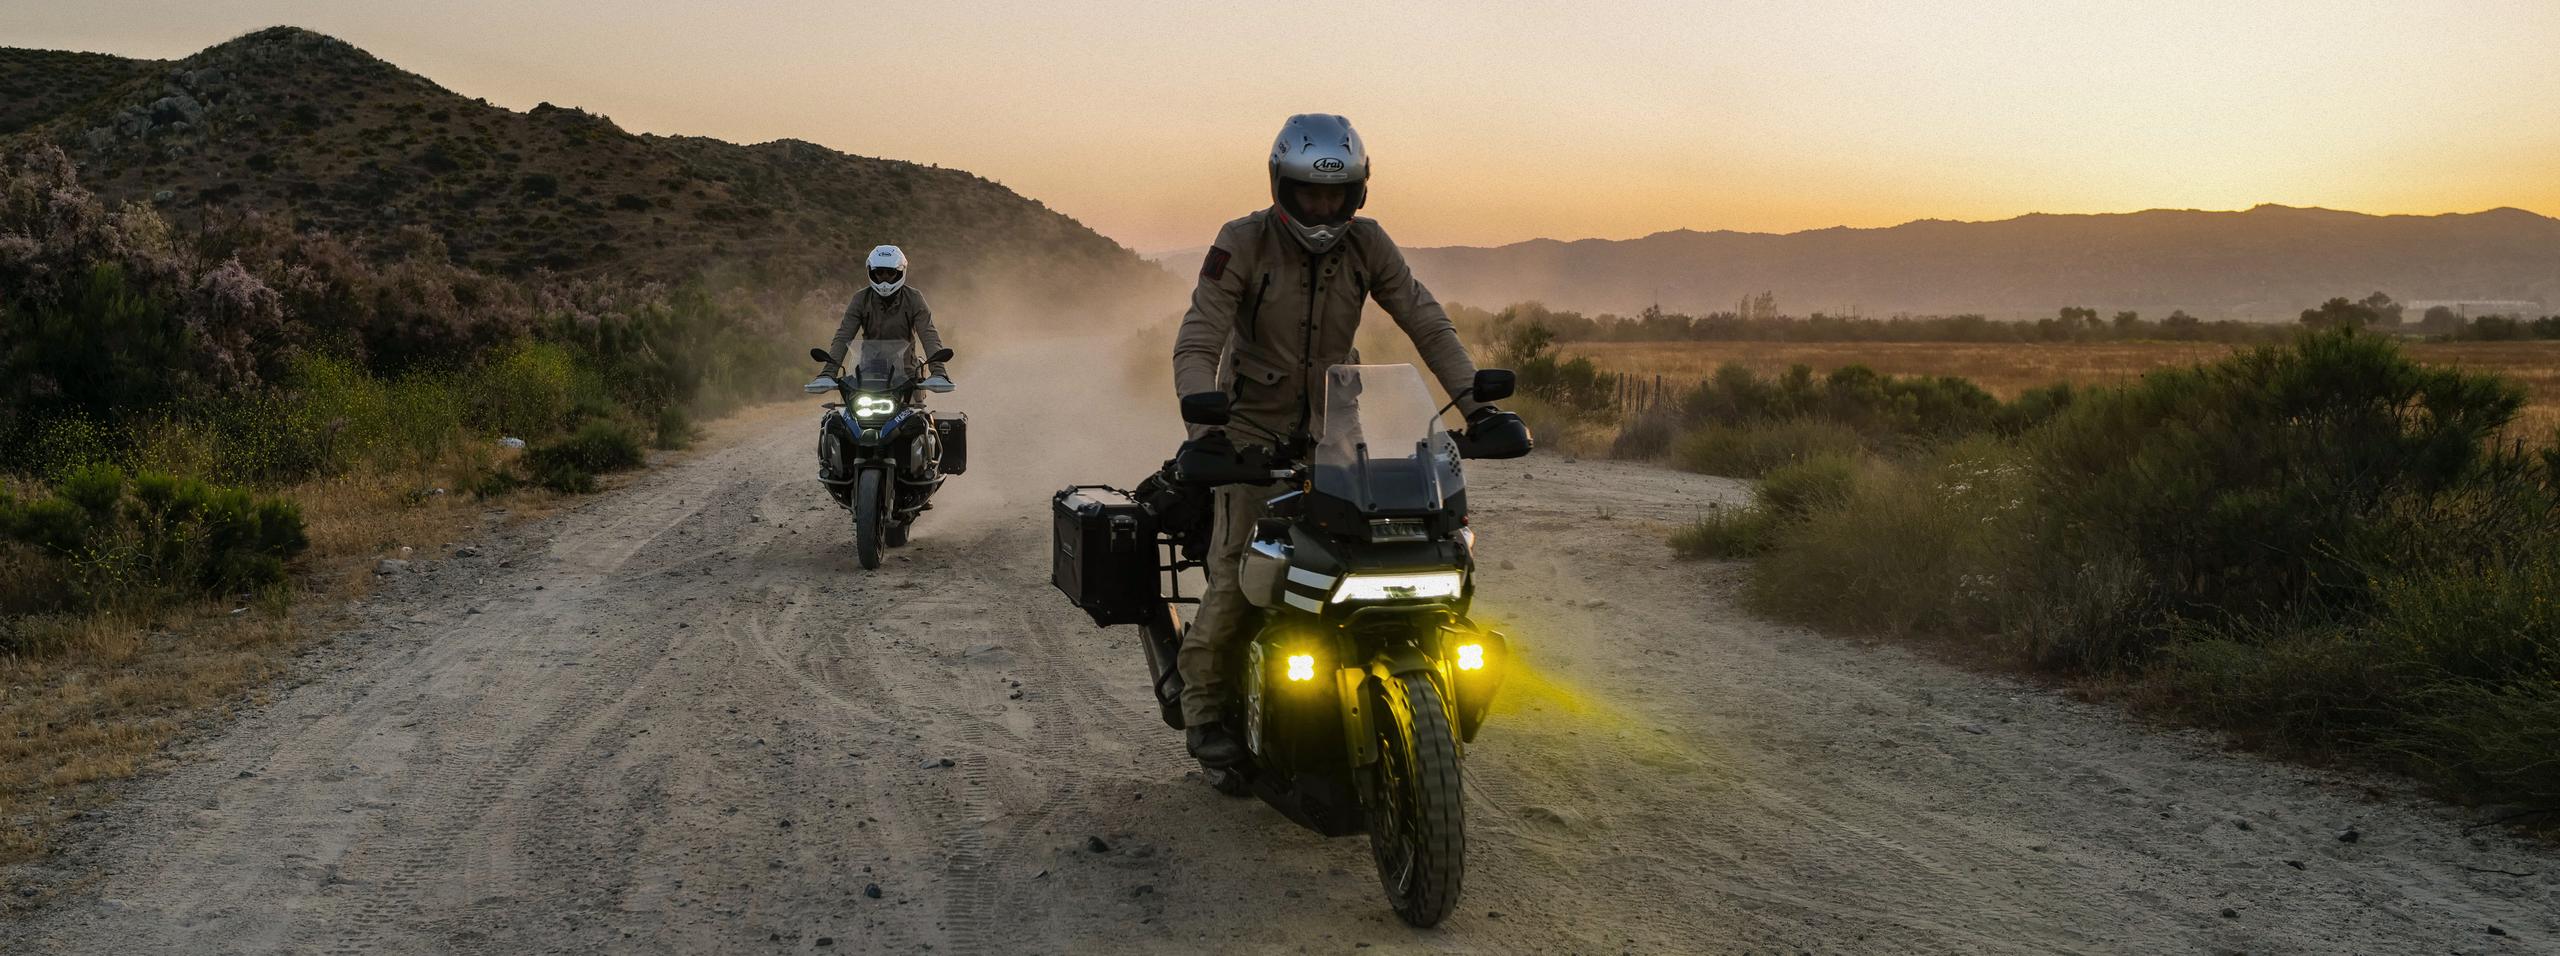 Two motorcyclists riding down dirt path in Baja California at sunset